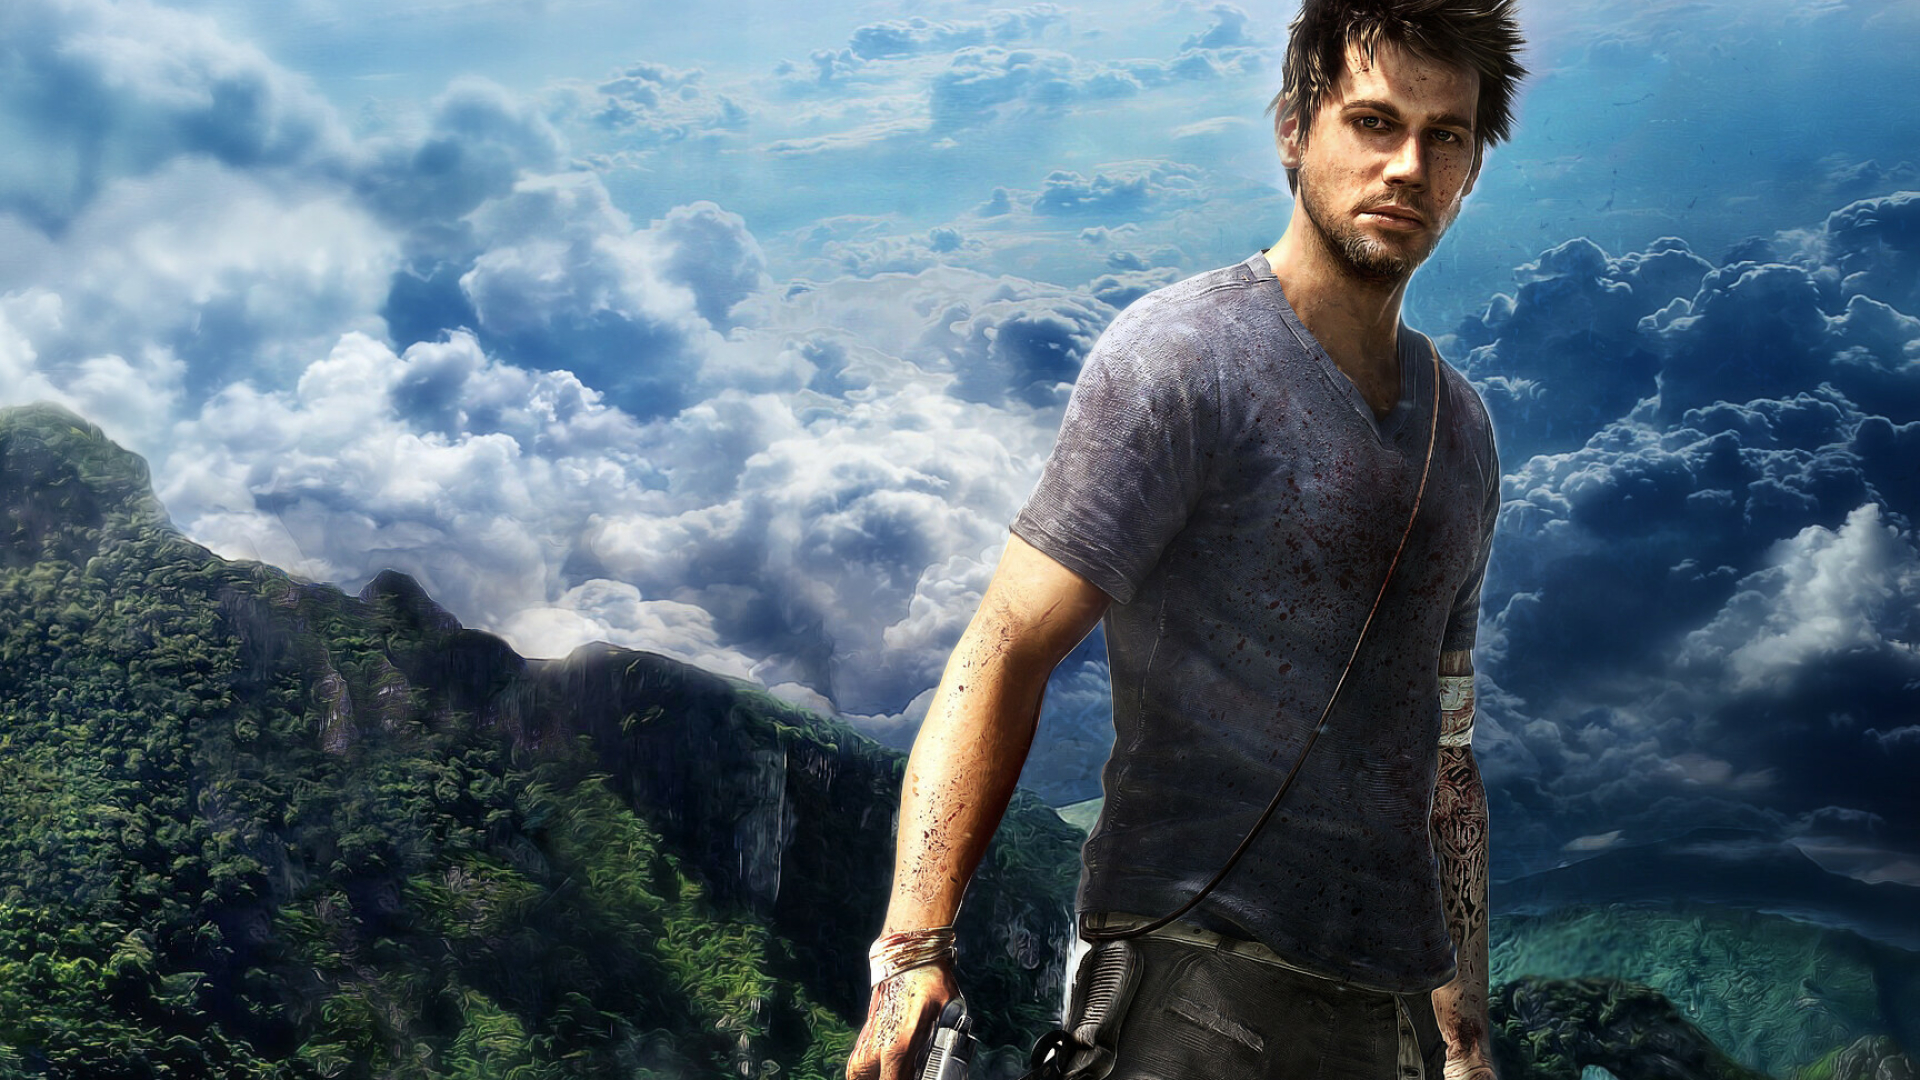 Far Cry 3: An open world first-person shooter set on an island unlike any other, Jason Brody. 1920x1080 Full HD Wallpaper.